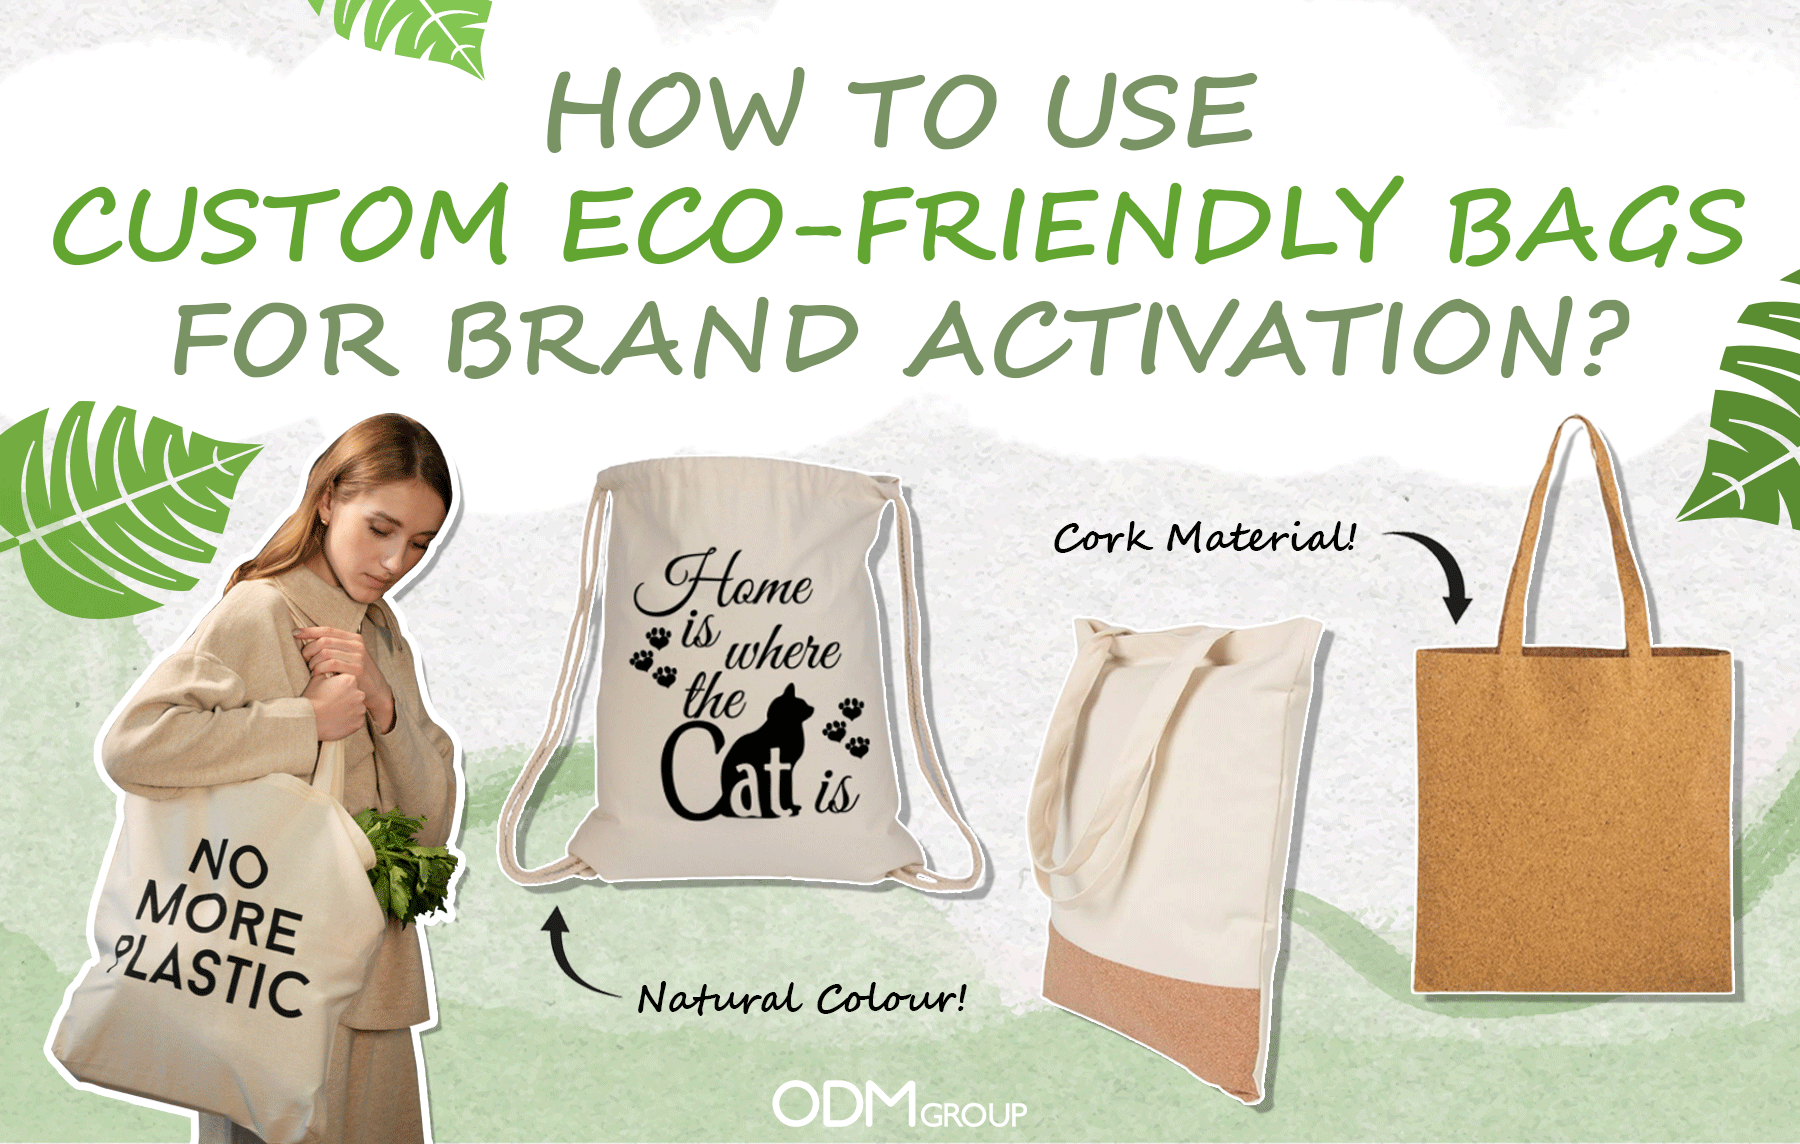 5 Smart Reasons to Market Your Brand with Eco-Friendly Custom